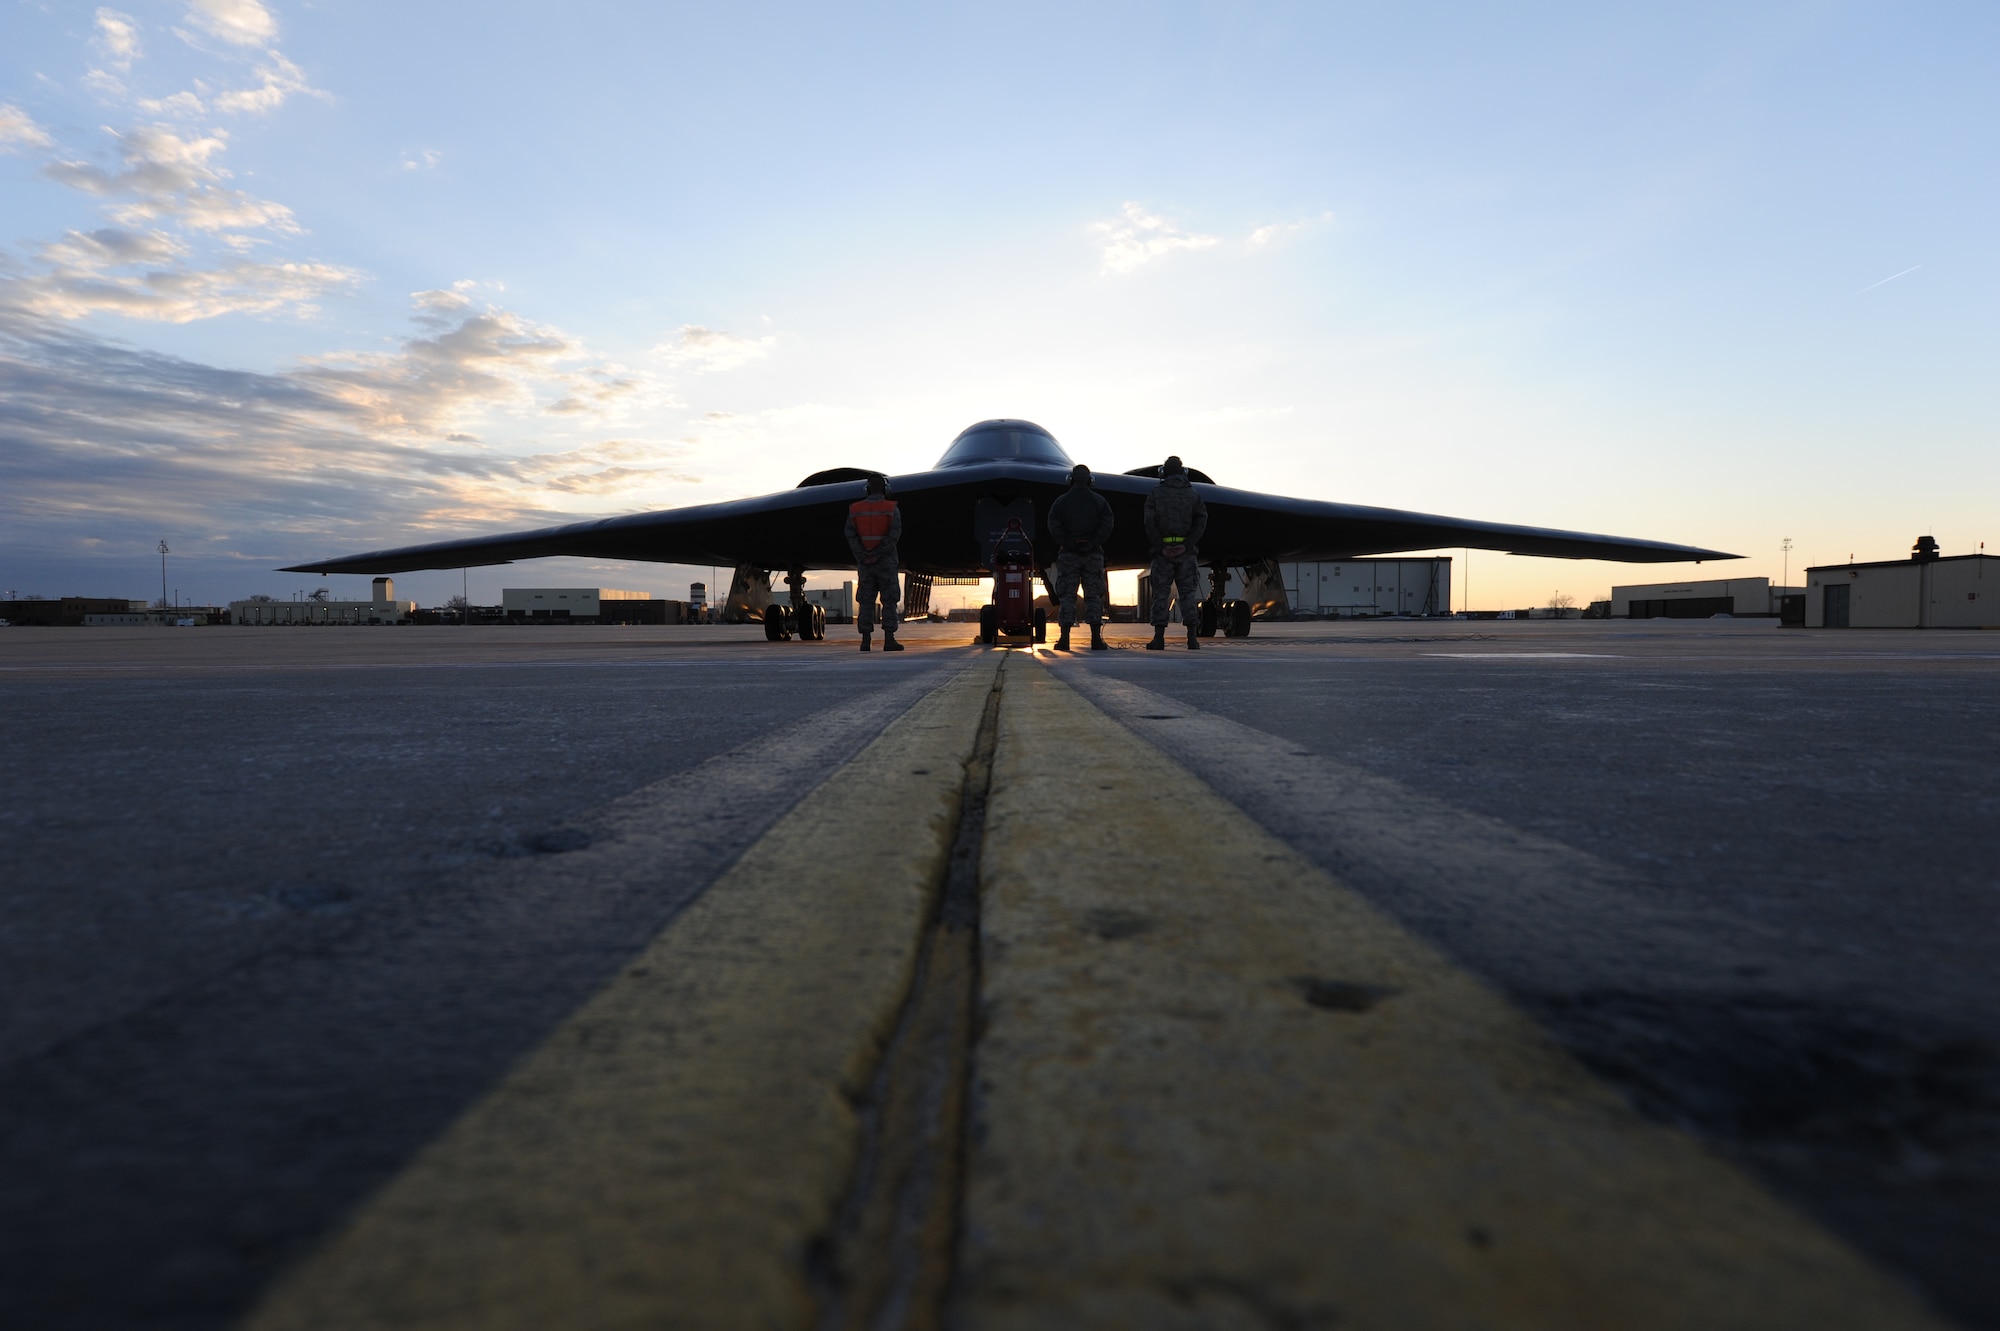 U.S. Air Force B-2 Spirit crew chiefs stand at parade rest while performing post flight inspections with pilots in the cockpit of the “Spirit of Florida” at Whiteman Air Force Base, Mo., April 1, 2013. The pilots just completed a historic training mission in which it became the first B-2 to reach 7,000 flight hours.   (U.S. Air Force photo by Staff Sgt. Nick Wilson/Released)